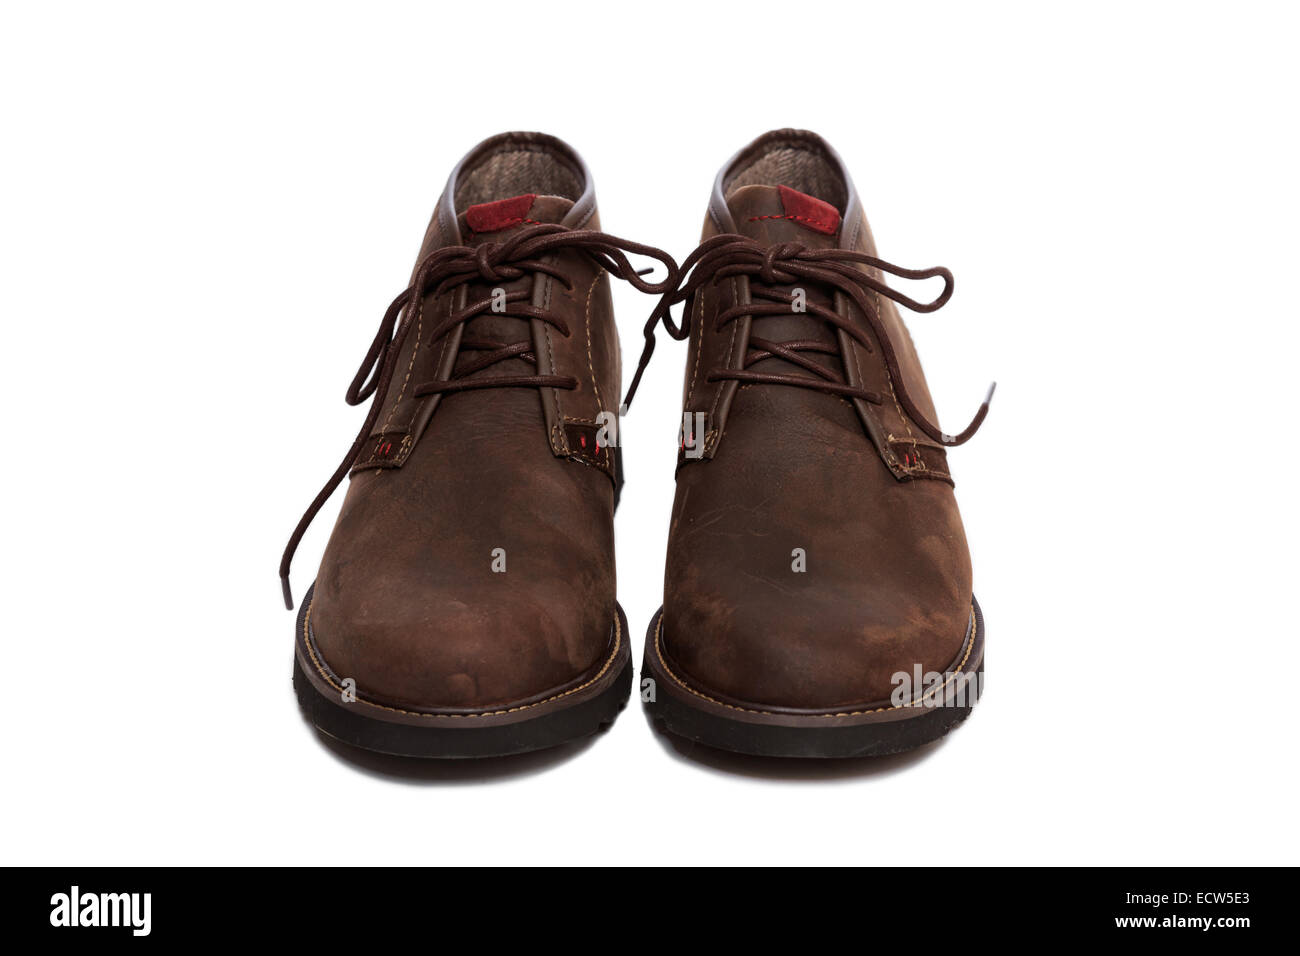 A pair of brown Chukka Boot shoes Stock Photo